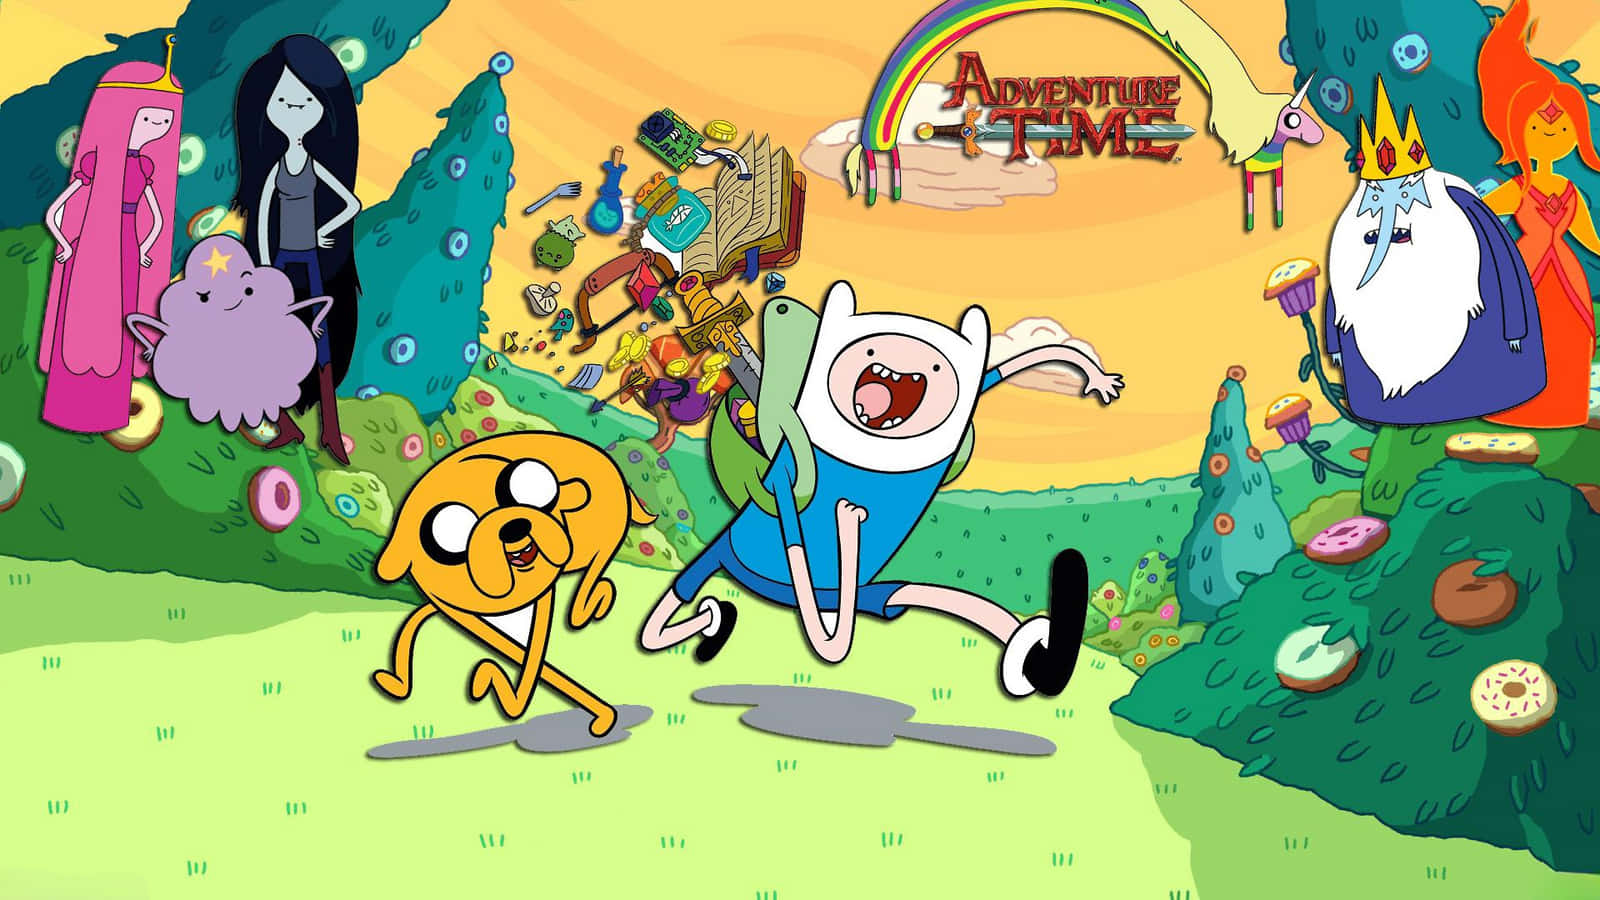 100+] Adventure Time Background s 